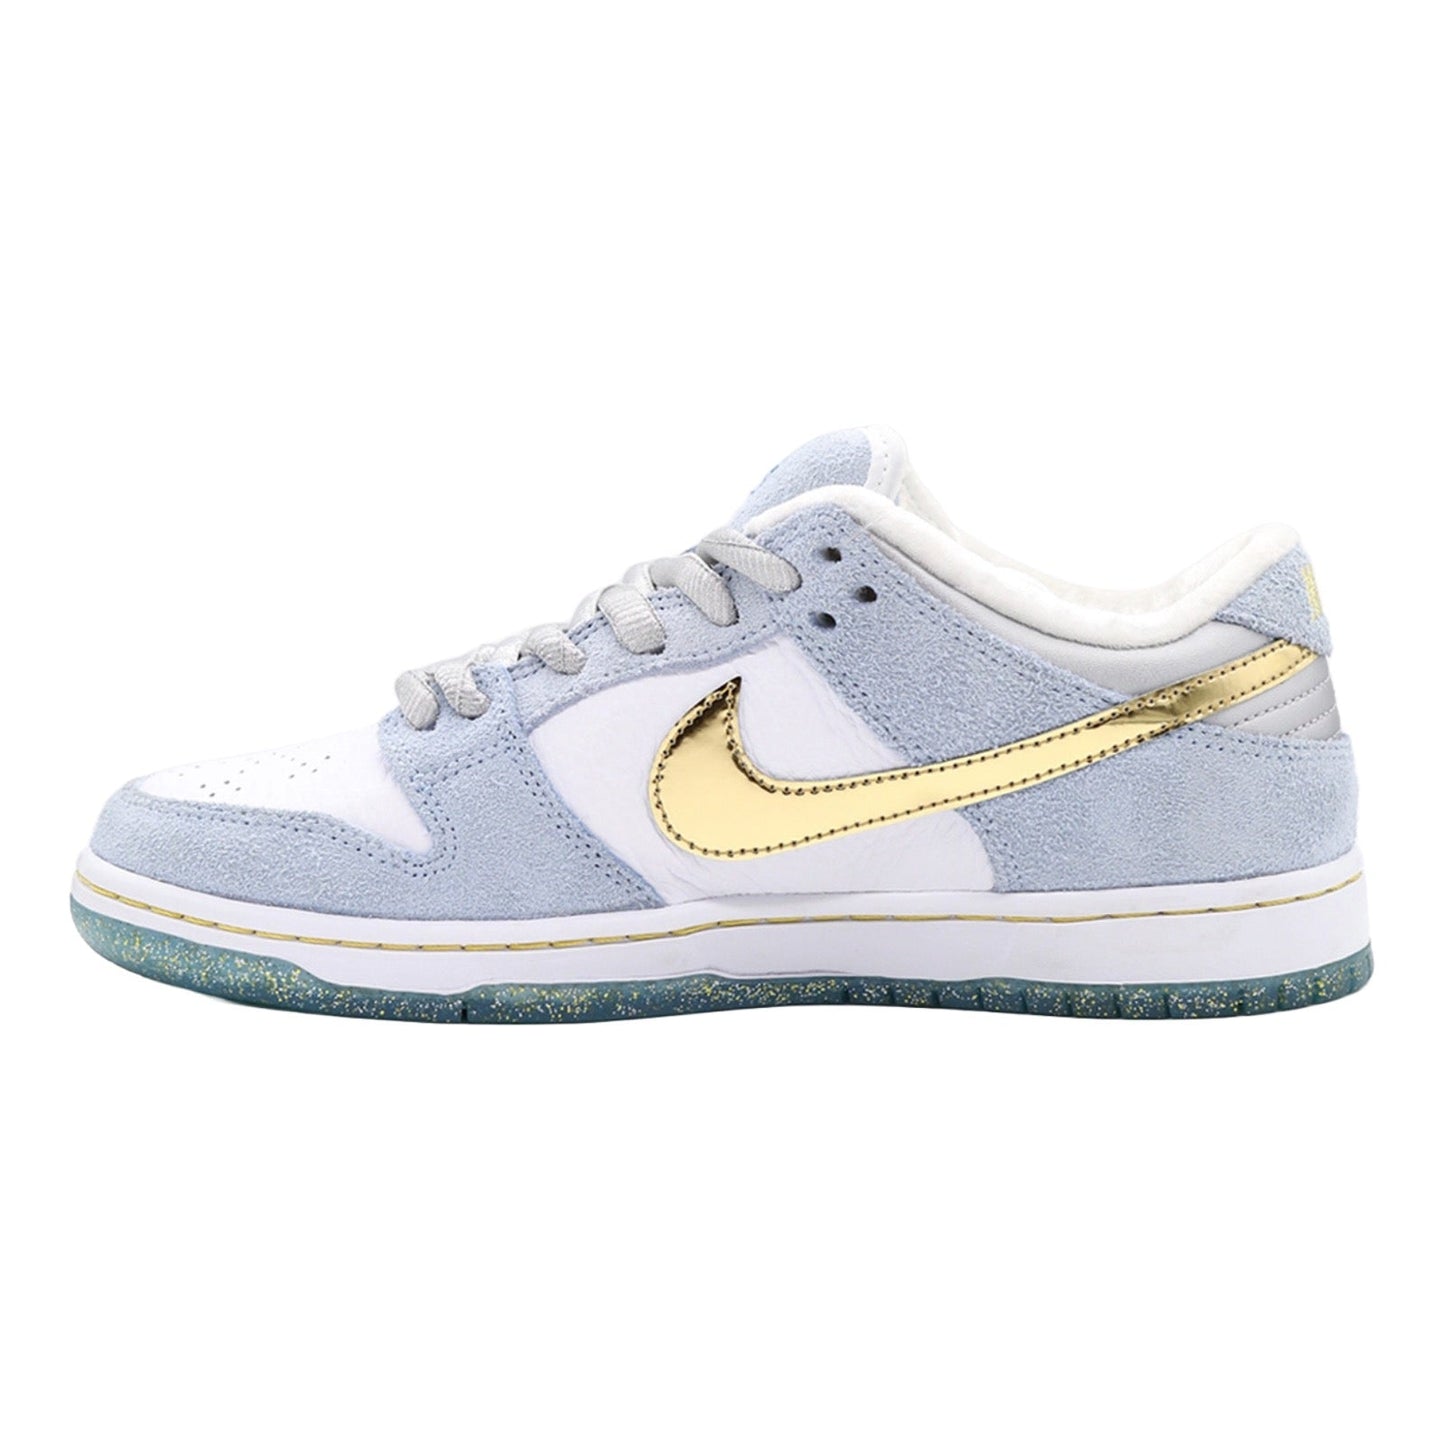 Nike SB Dunk Low, Sean Cliver Holiday Special